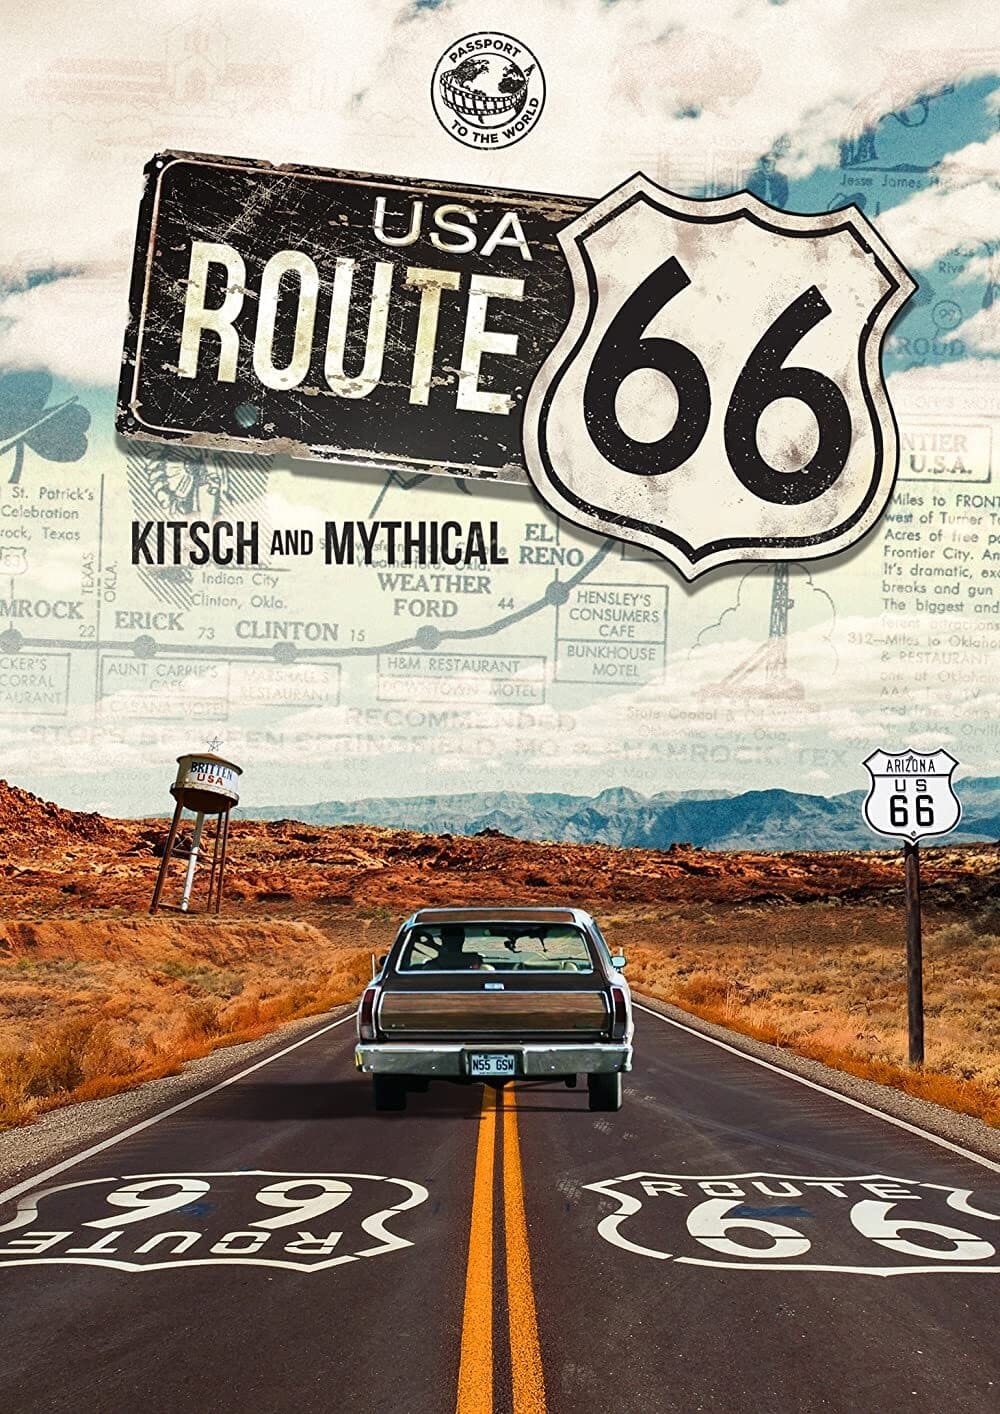 Passport To The World Route 66 (2019)